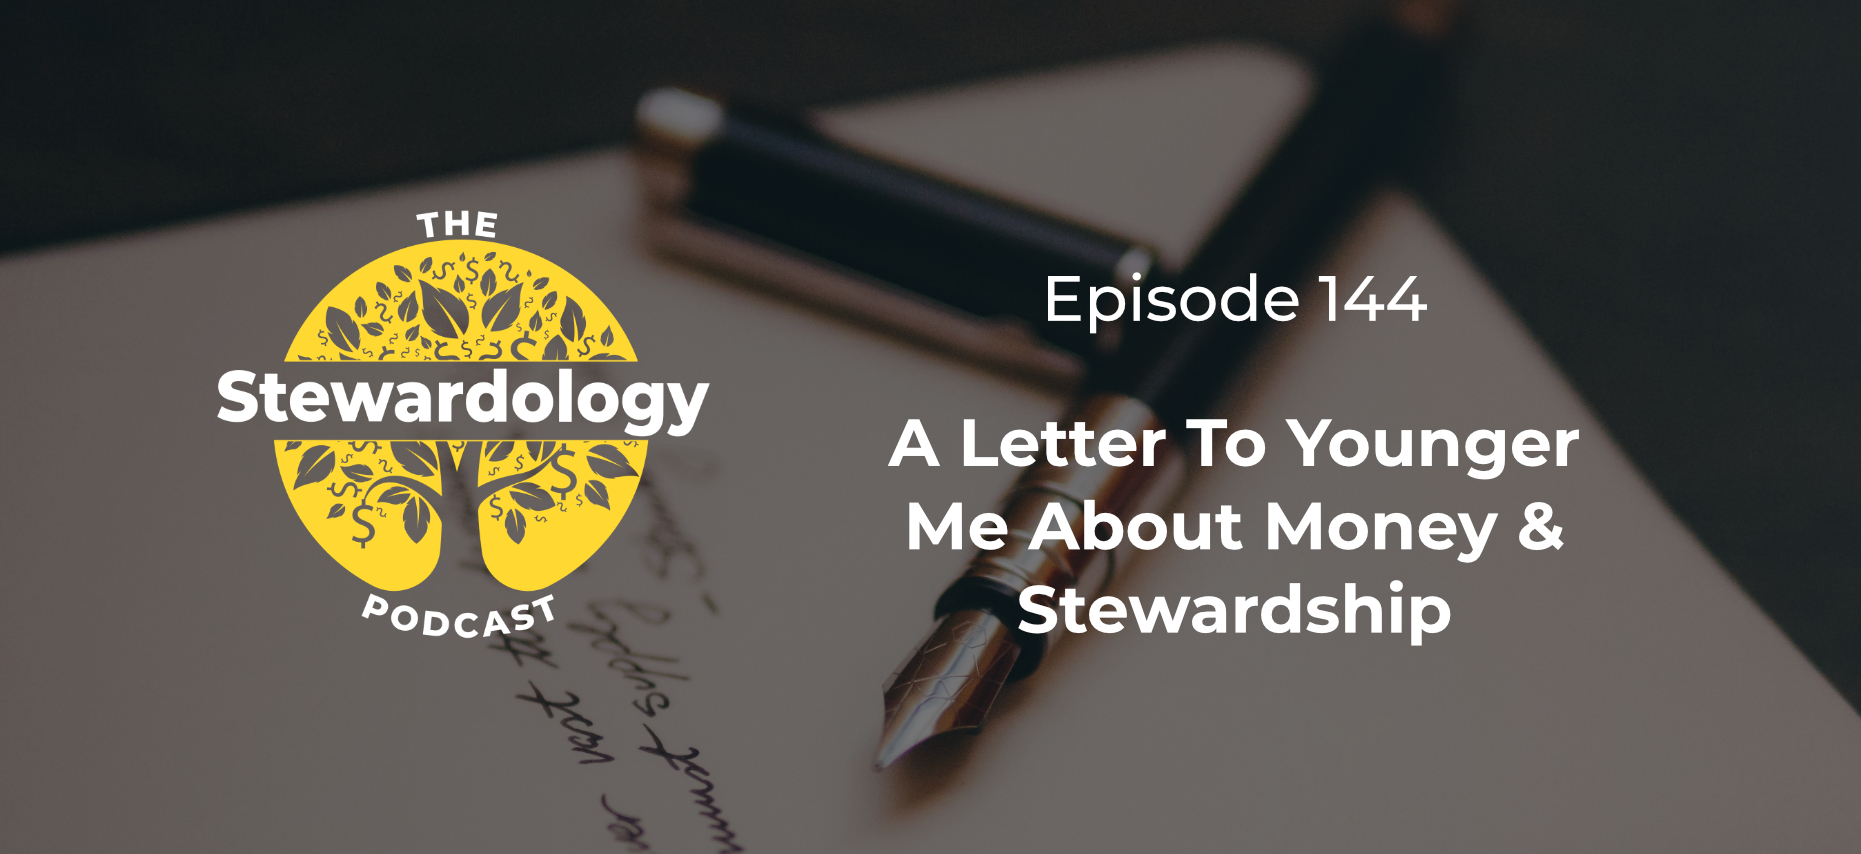 A Letter To Younger Me About Money & Stewardship